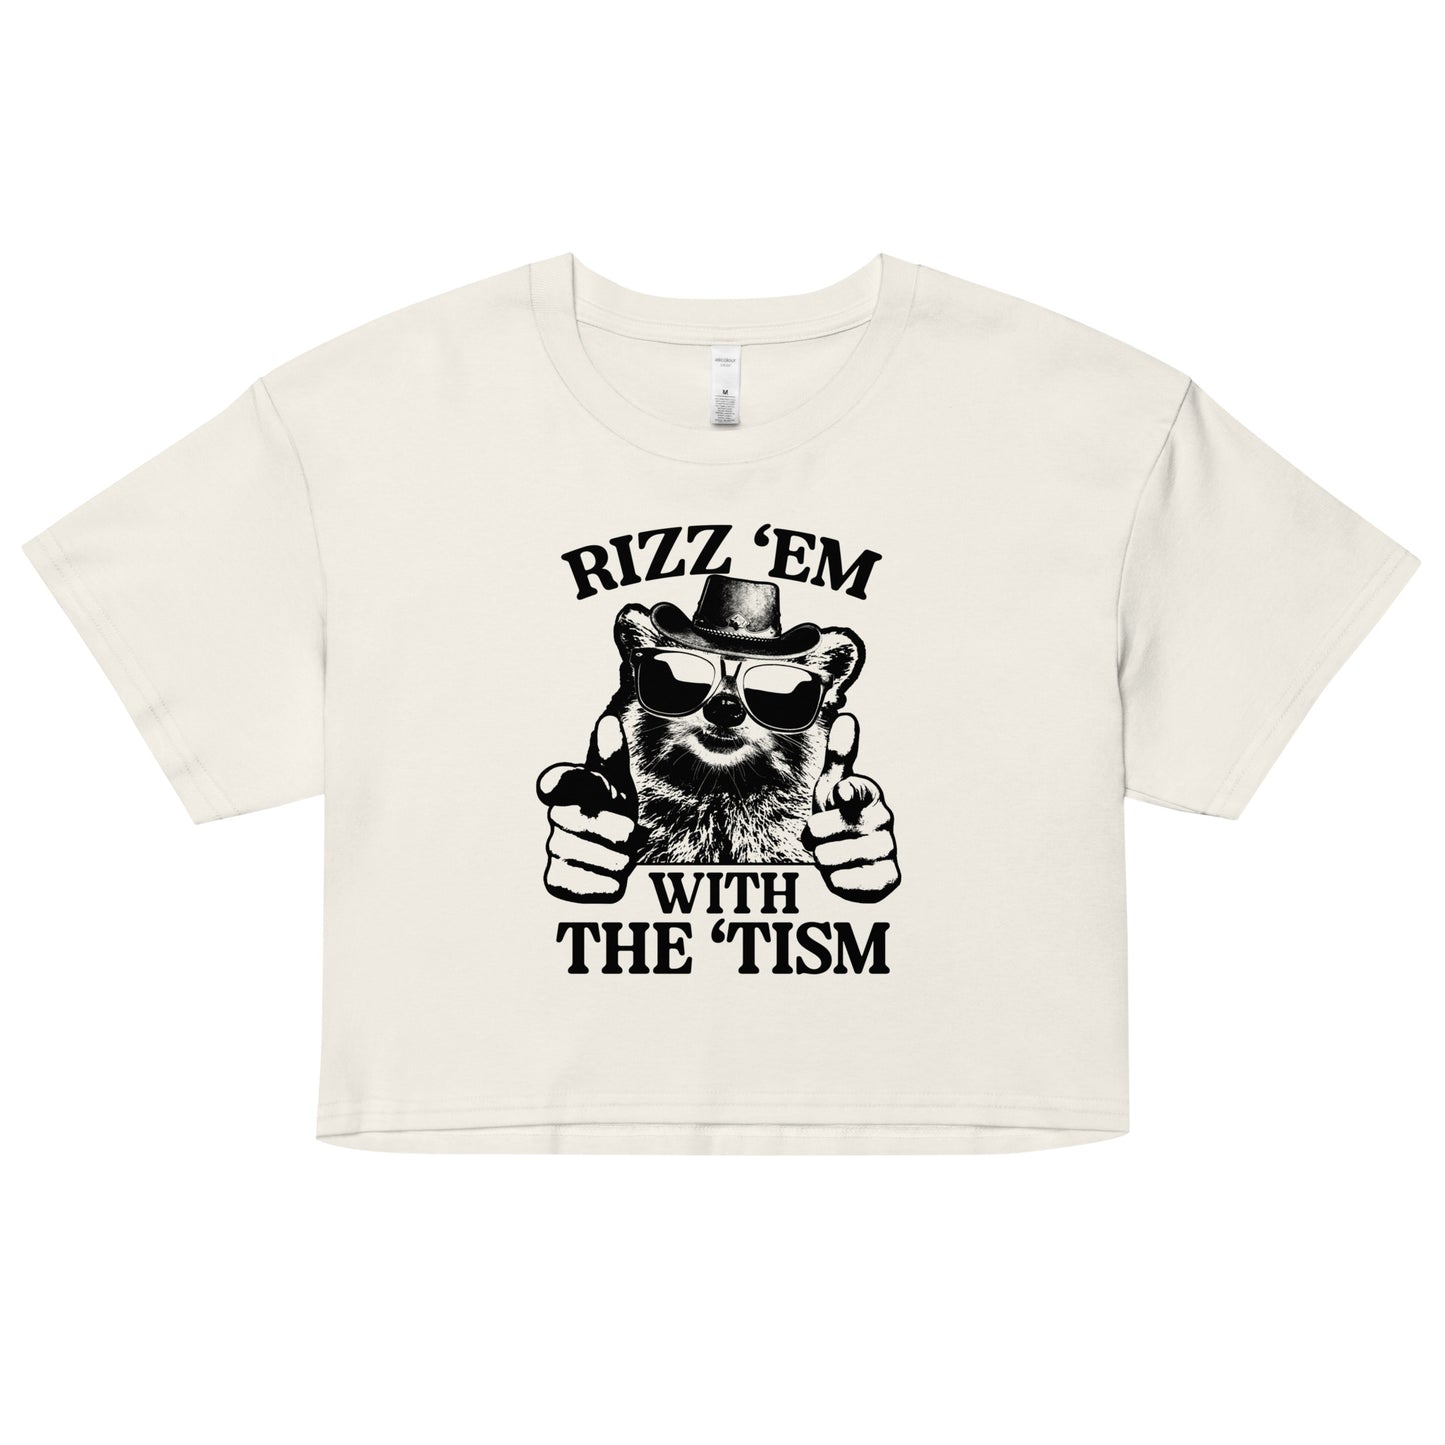 Rizz 'Em With the 'Tism (Raccoon) crop top